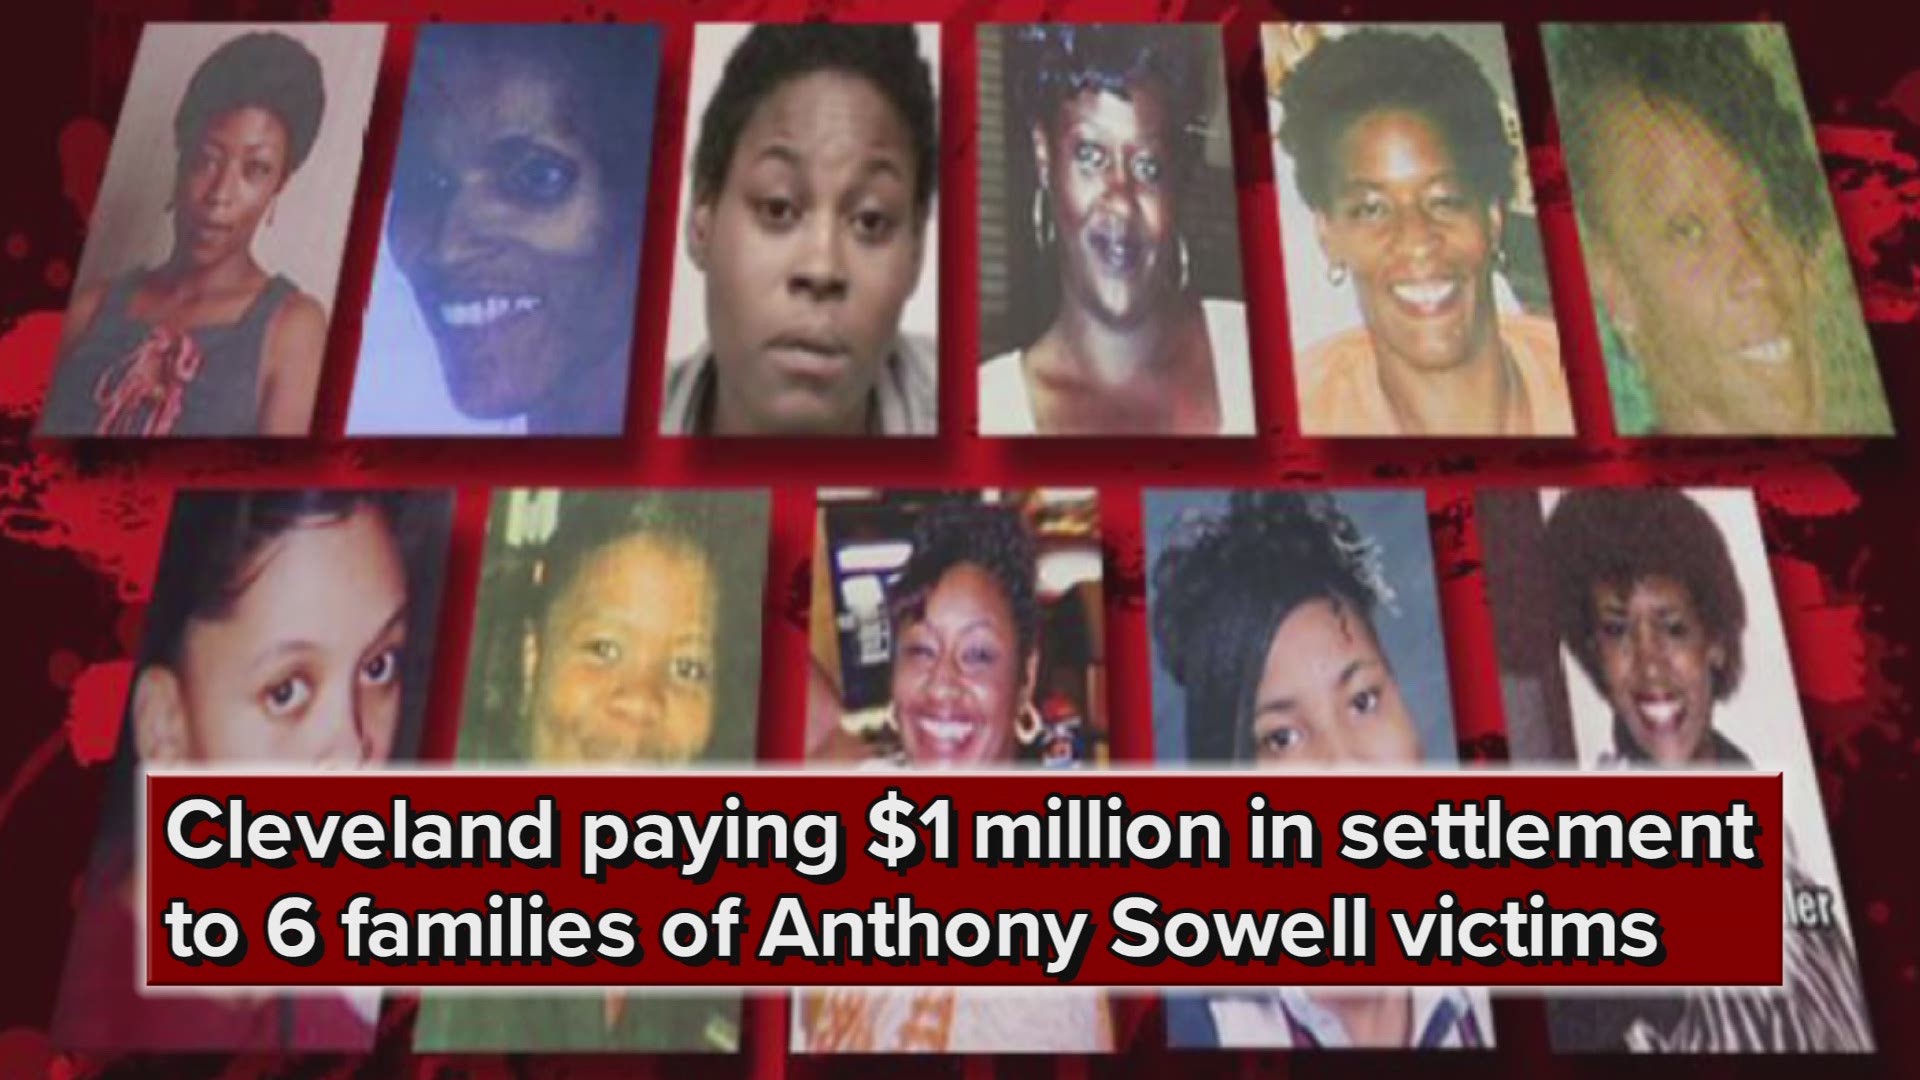 Cleveland paying $1 million in settlement to 6 families of Anthony Sowell victims